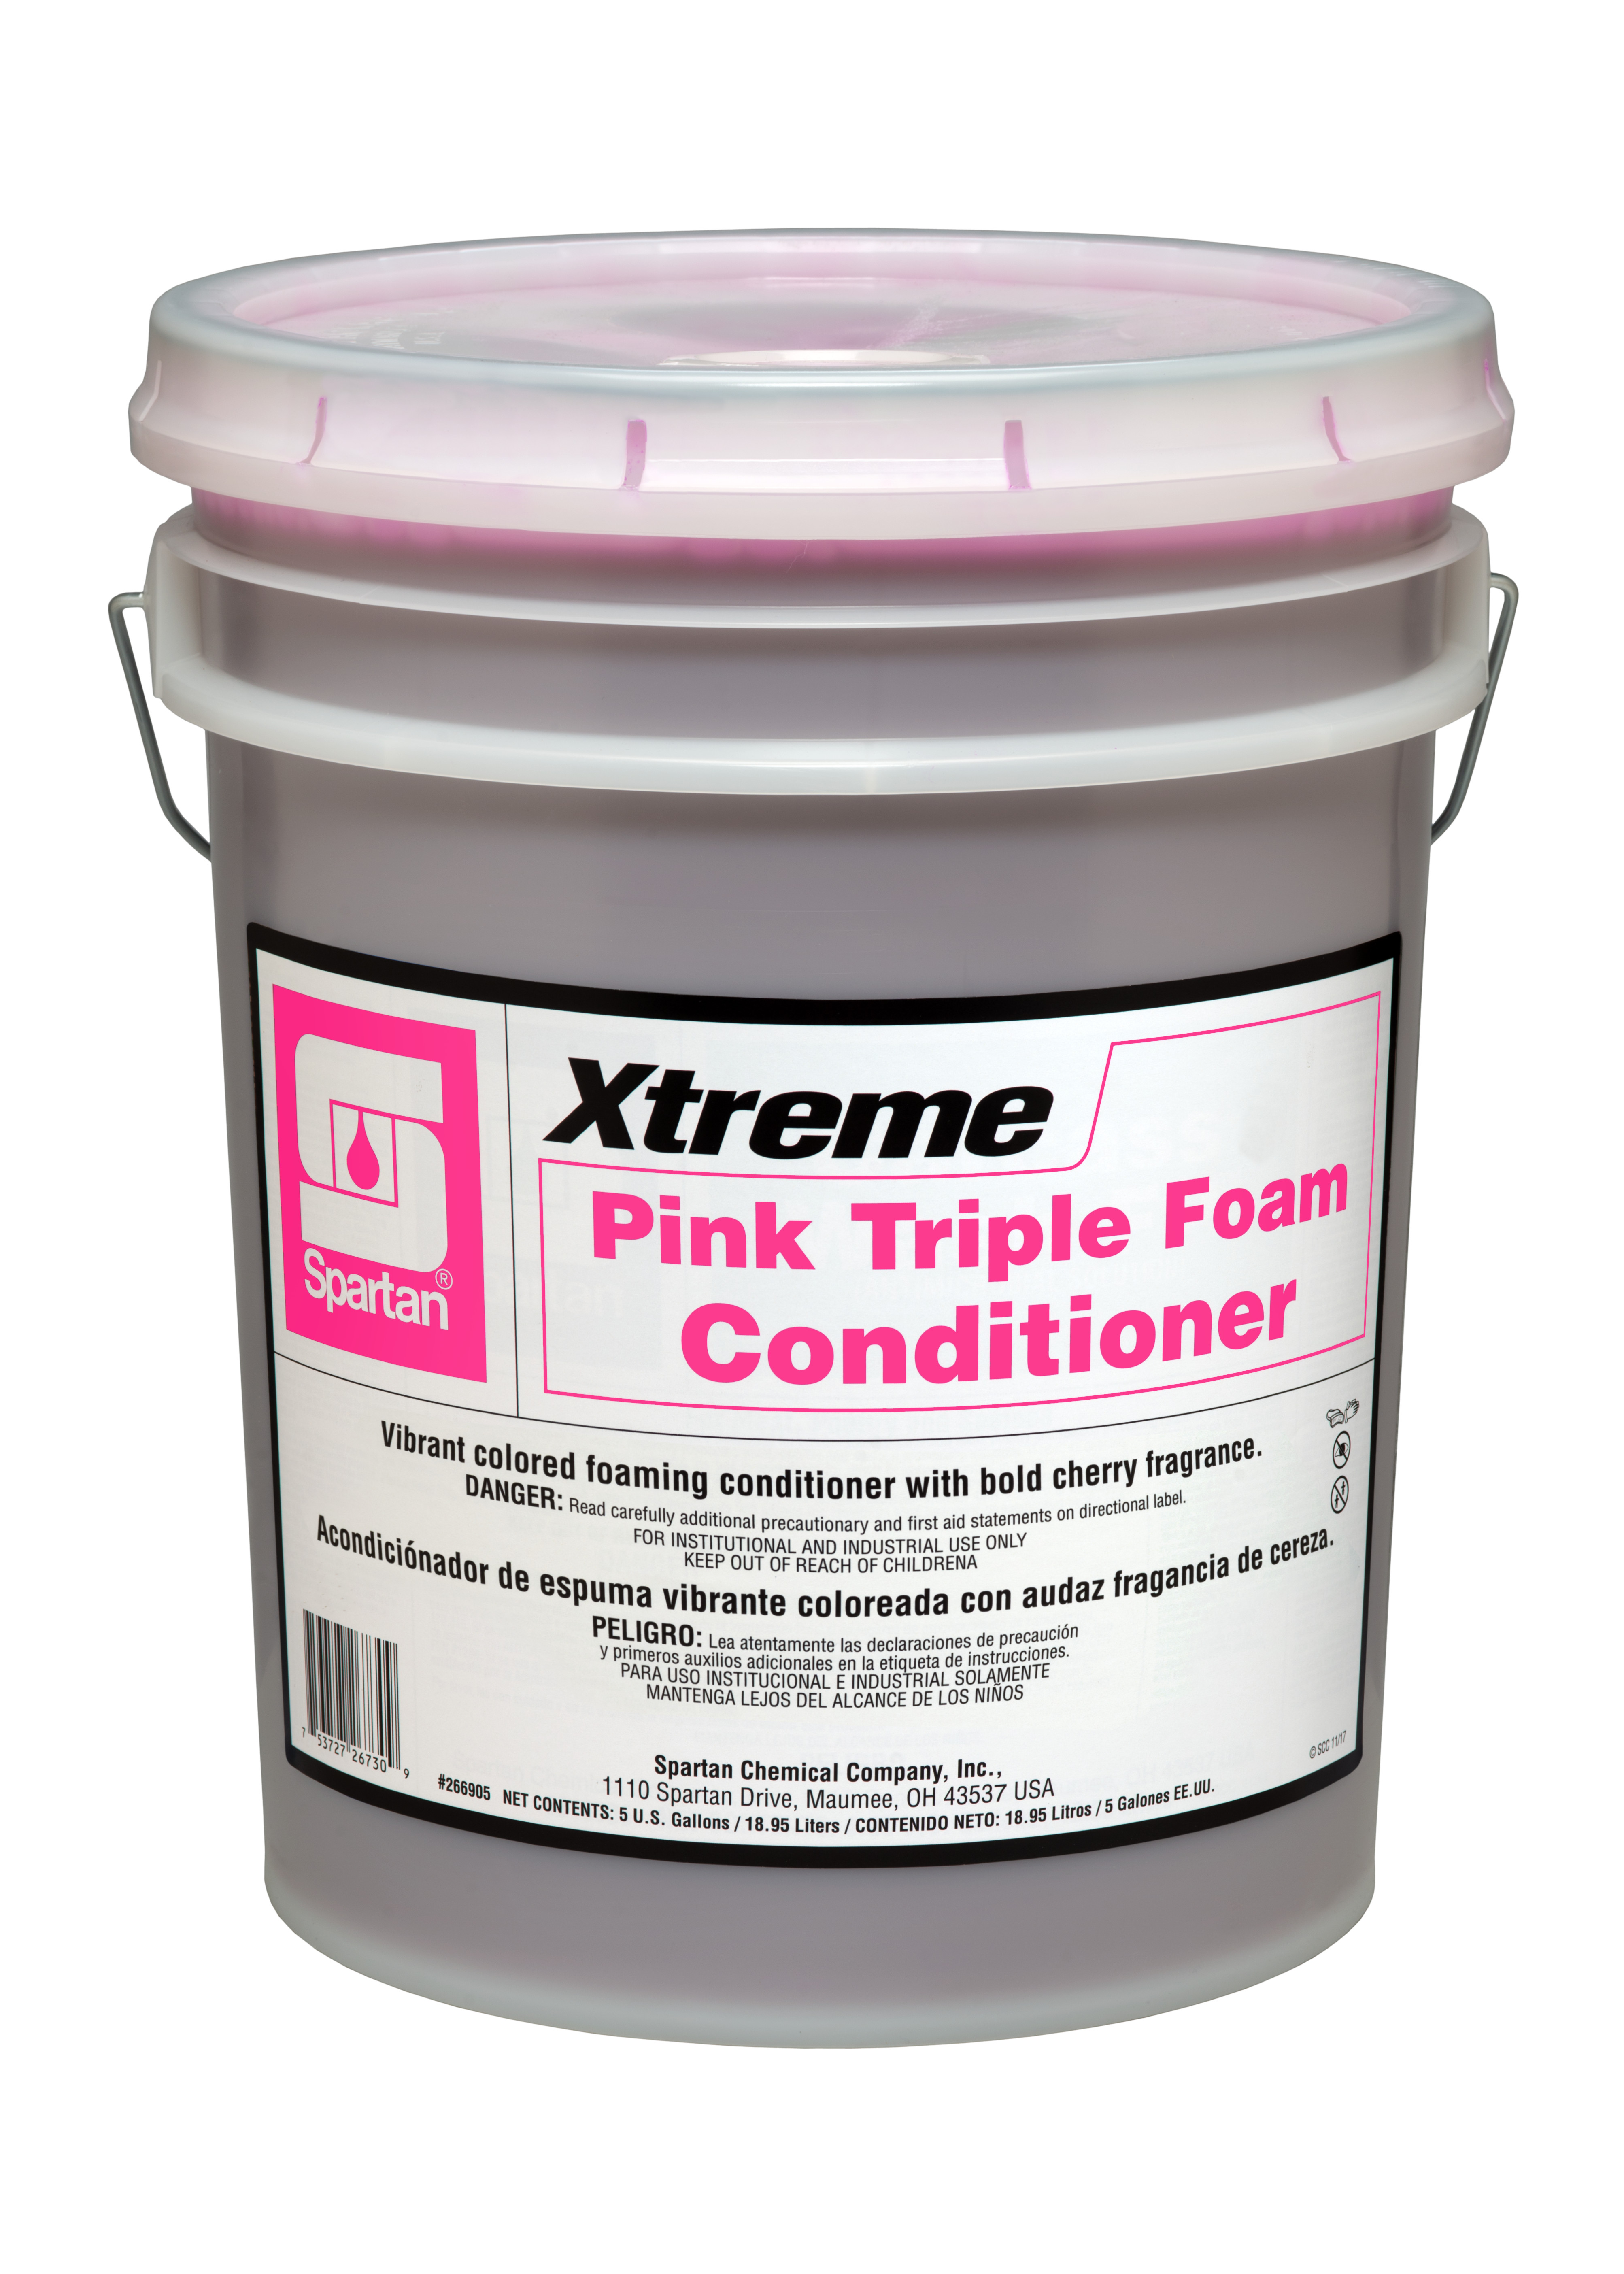 Spartan Chemical Company Xtreme Pink Triple Foam Conditioner, 5 GAL PAIL